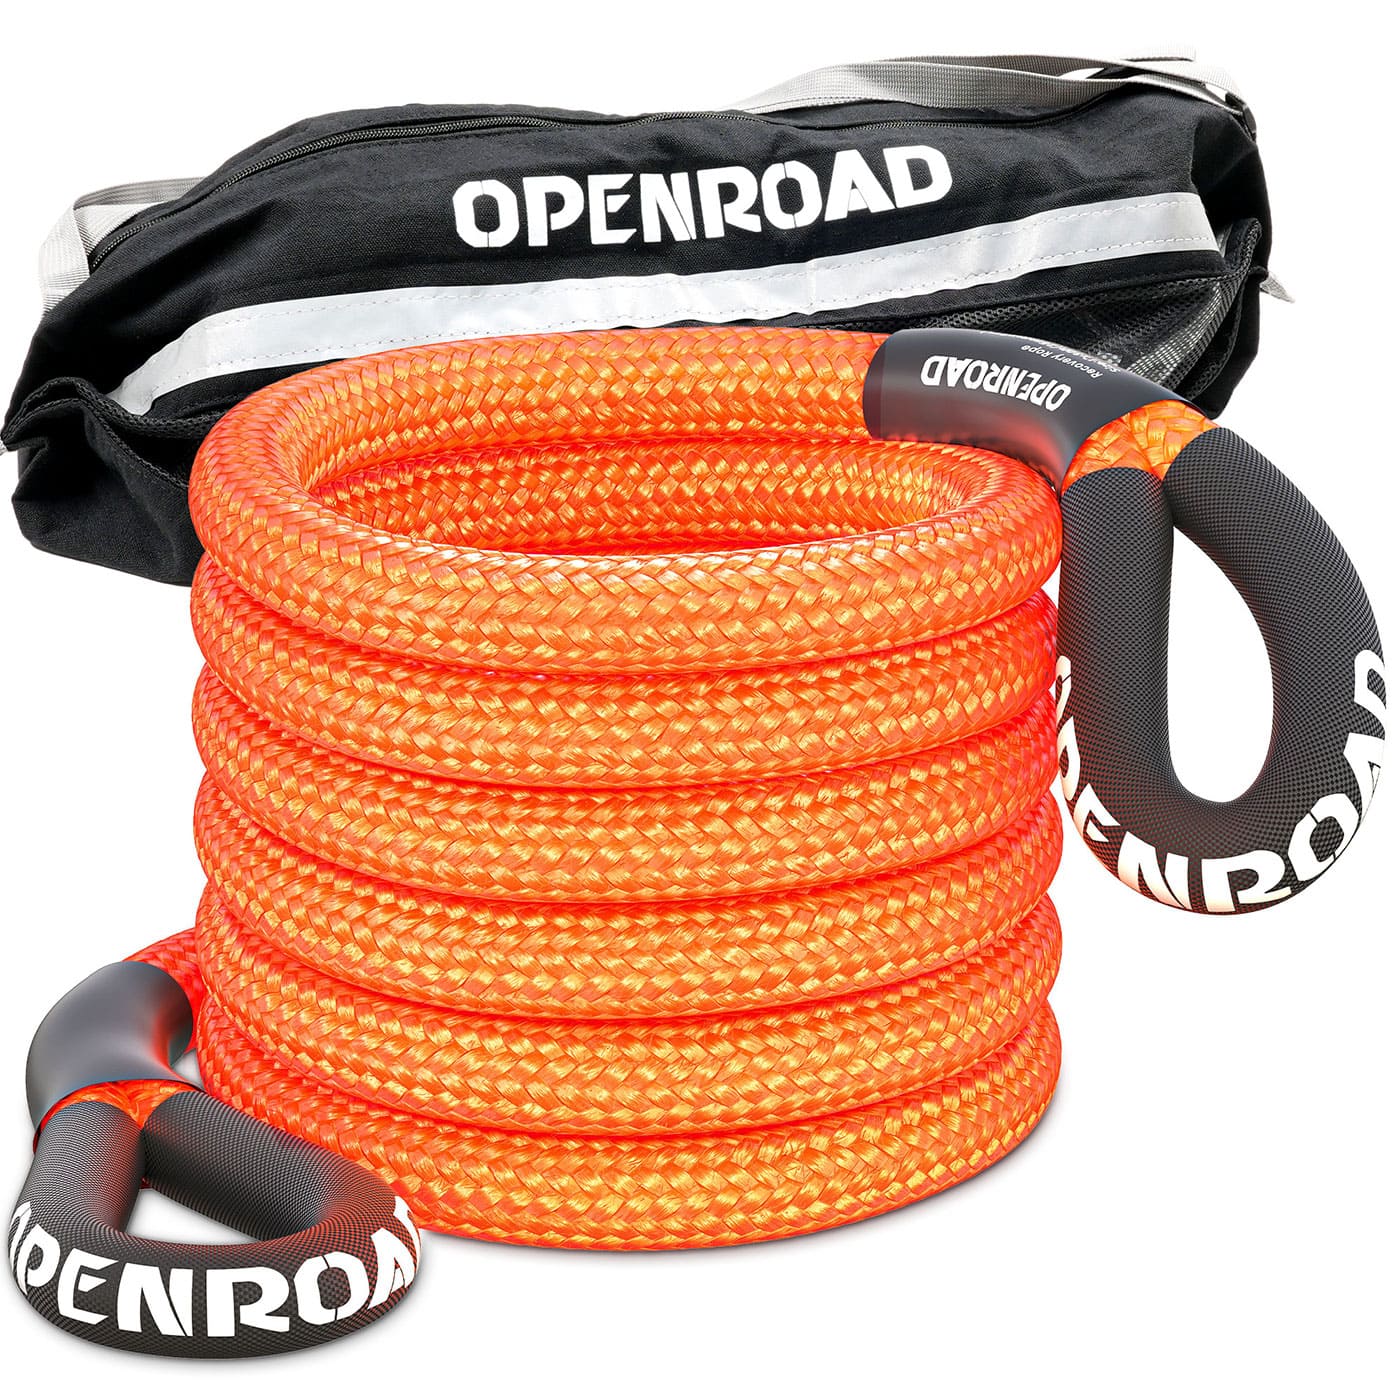 OPENROAD 1" x30' Kinetic Recovery Tow Rope (25,000lbs)，for Truck Off-road Vehicle ATV UTV, Carry Bag Included Recovery Straps OPENROAD Orange  